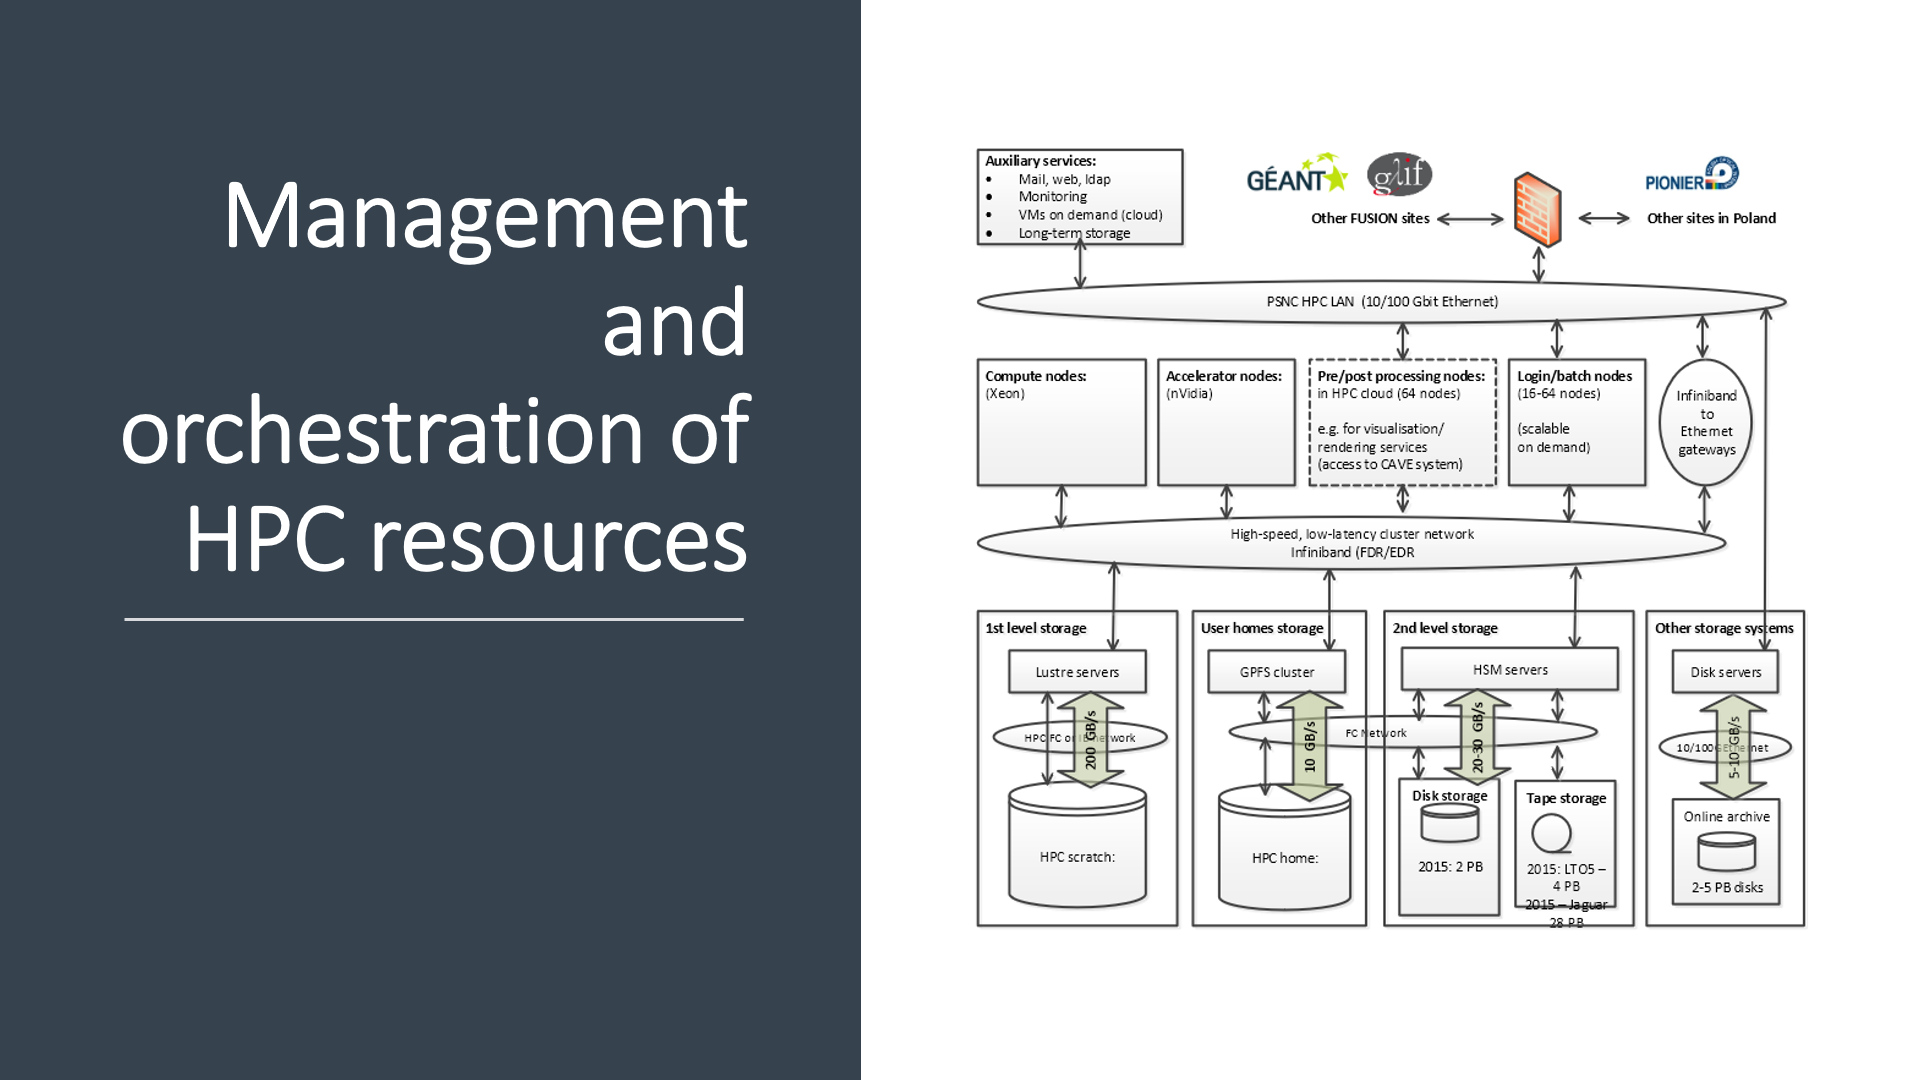 Management and orchestration of HPC resources